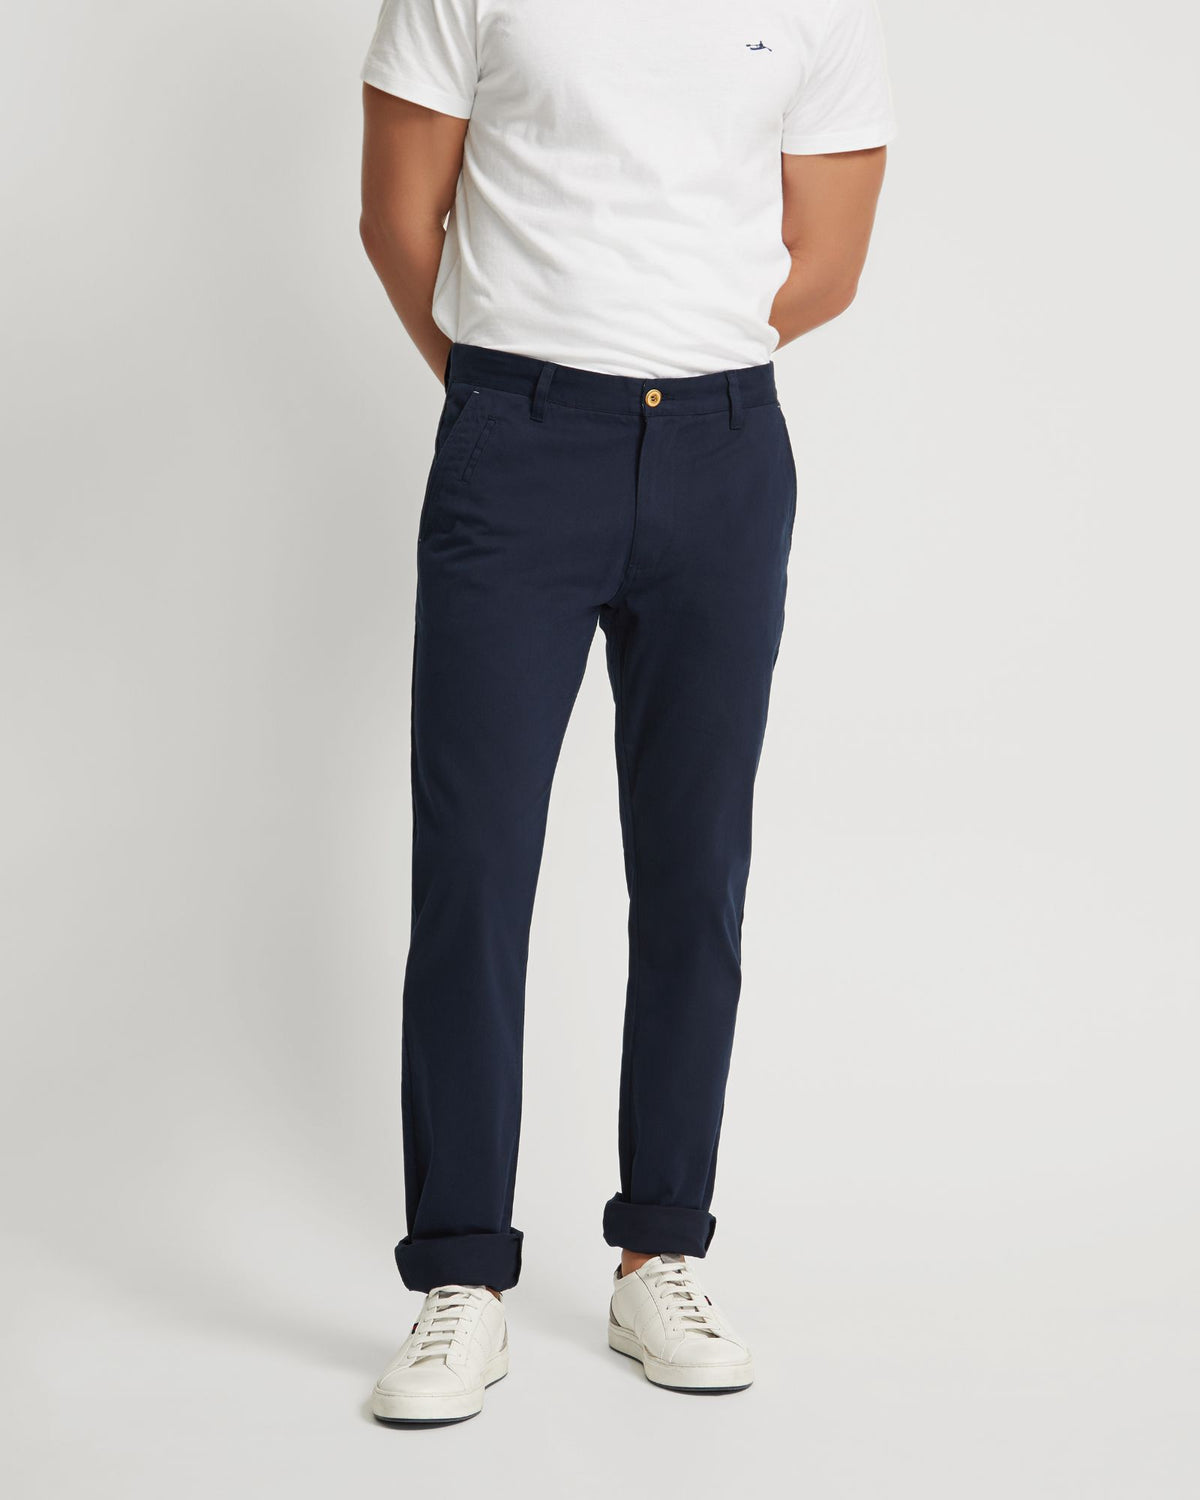 STRETCH SKINNY FIT CHINO MENS TROUSERS